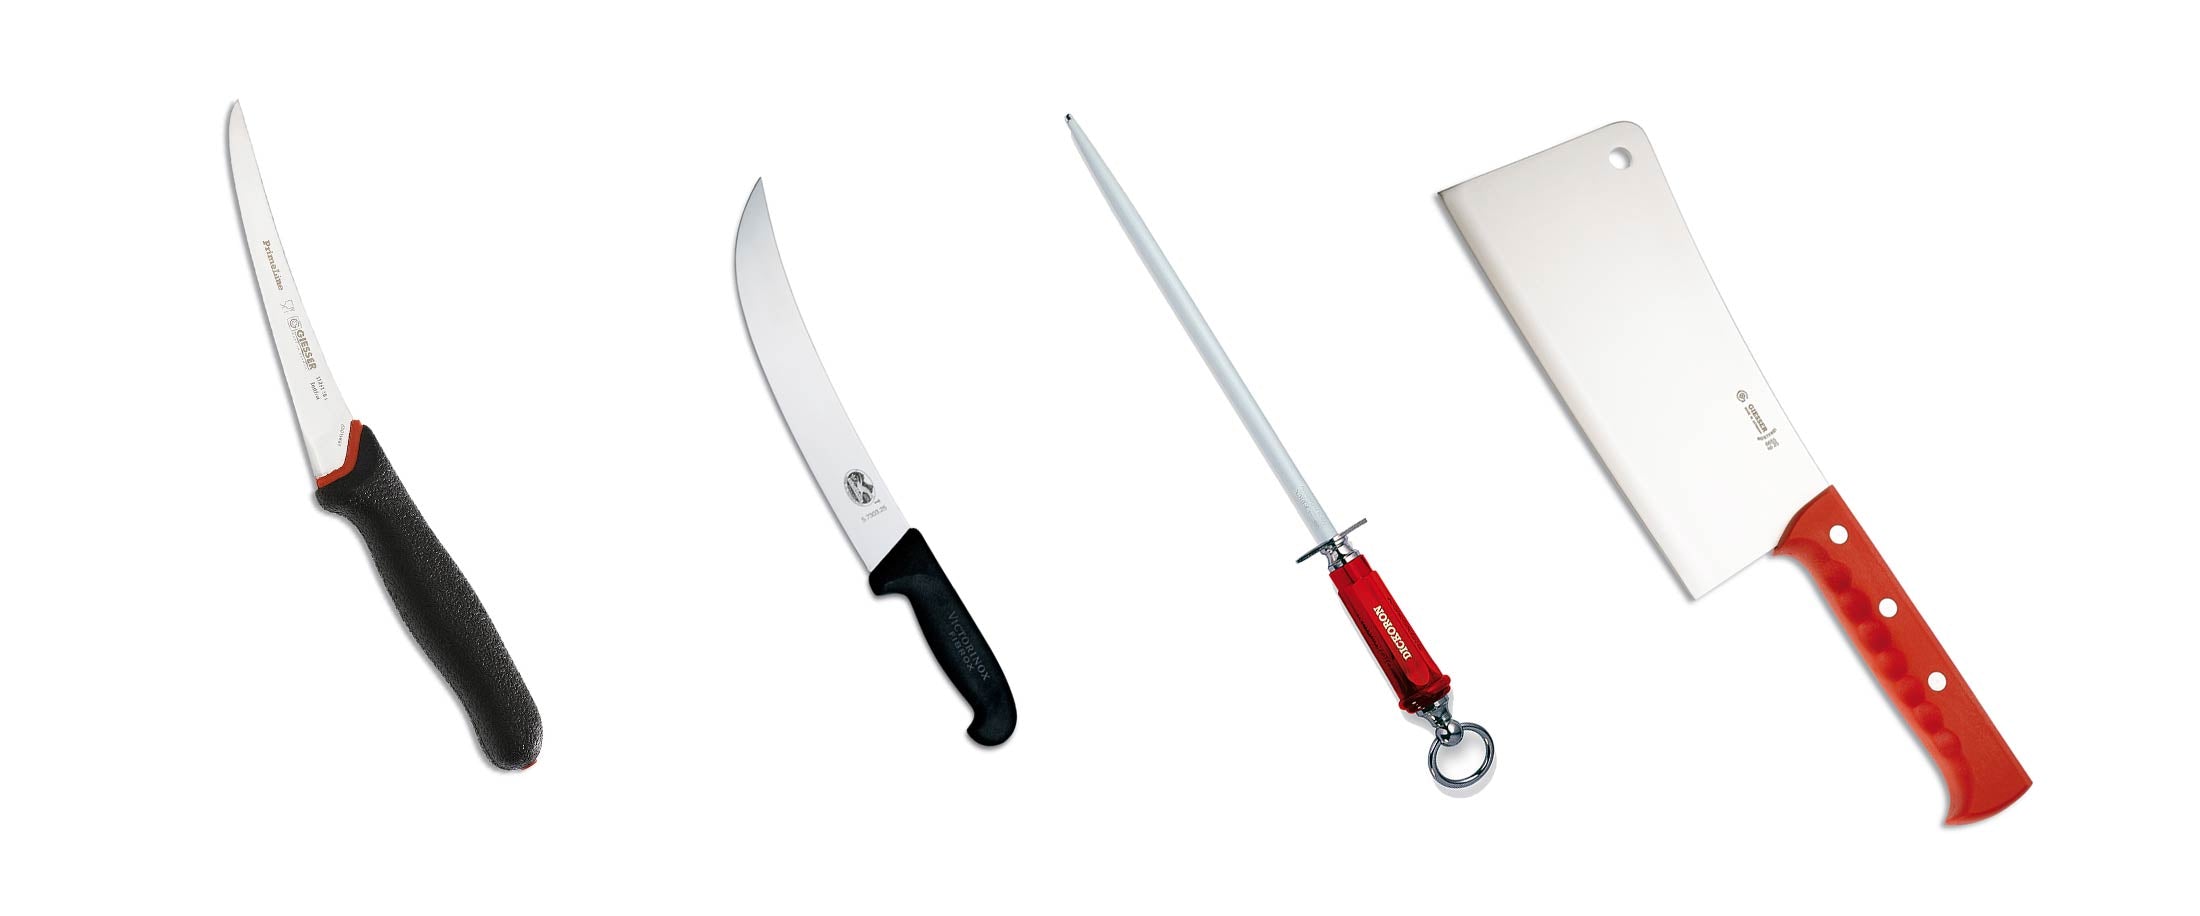 Complete Butcher Supplies stock a range of knives and steels